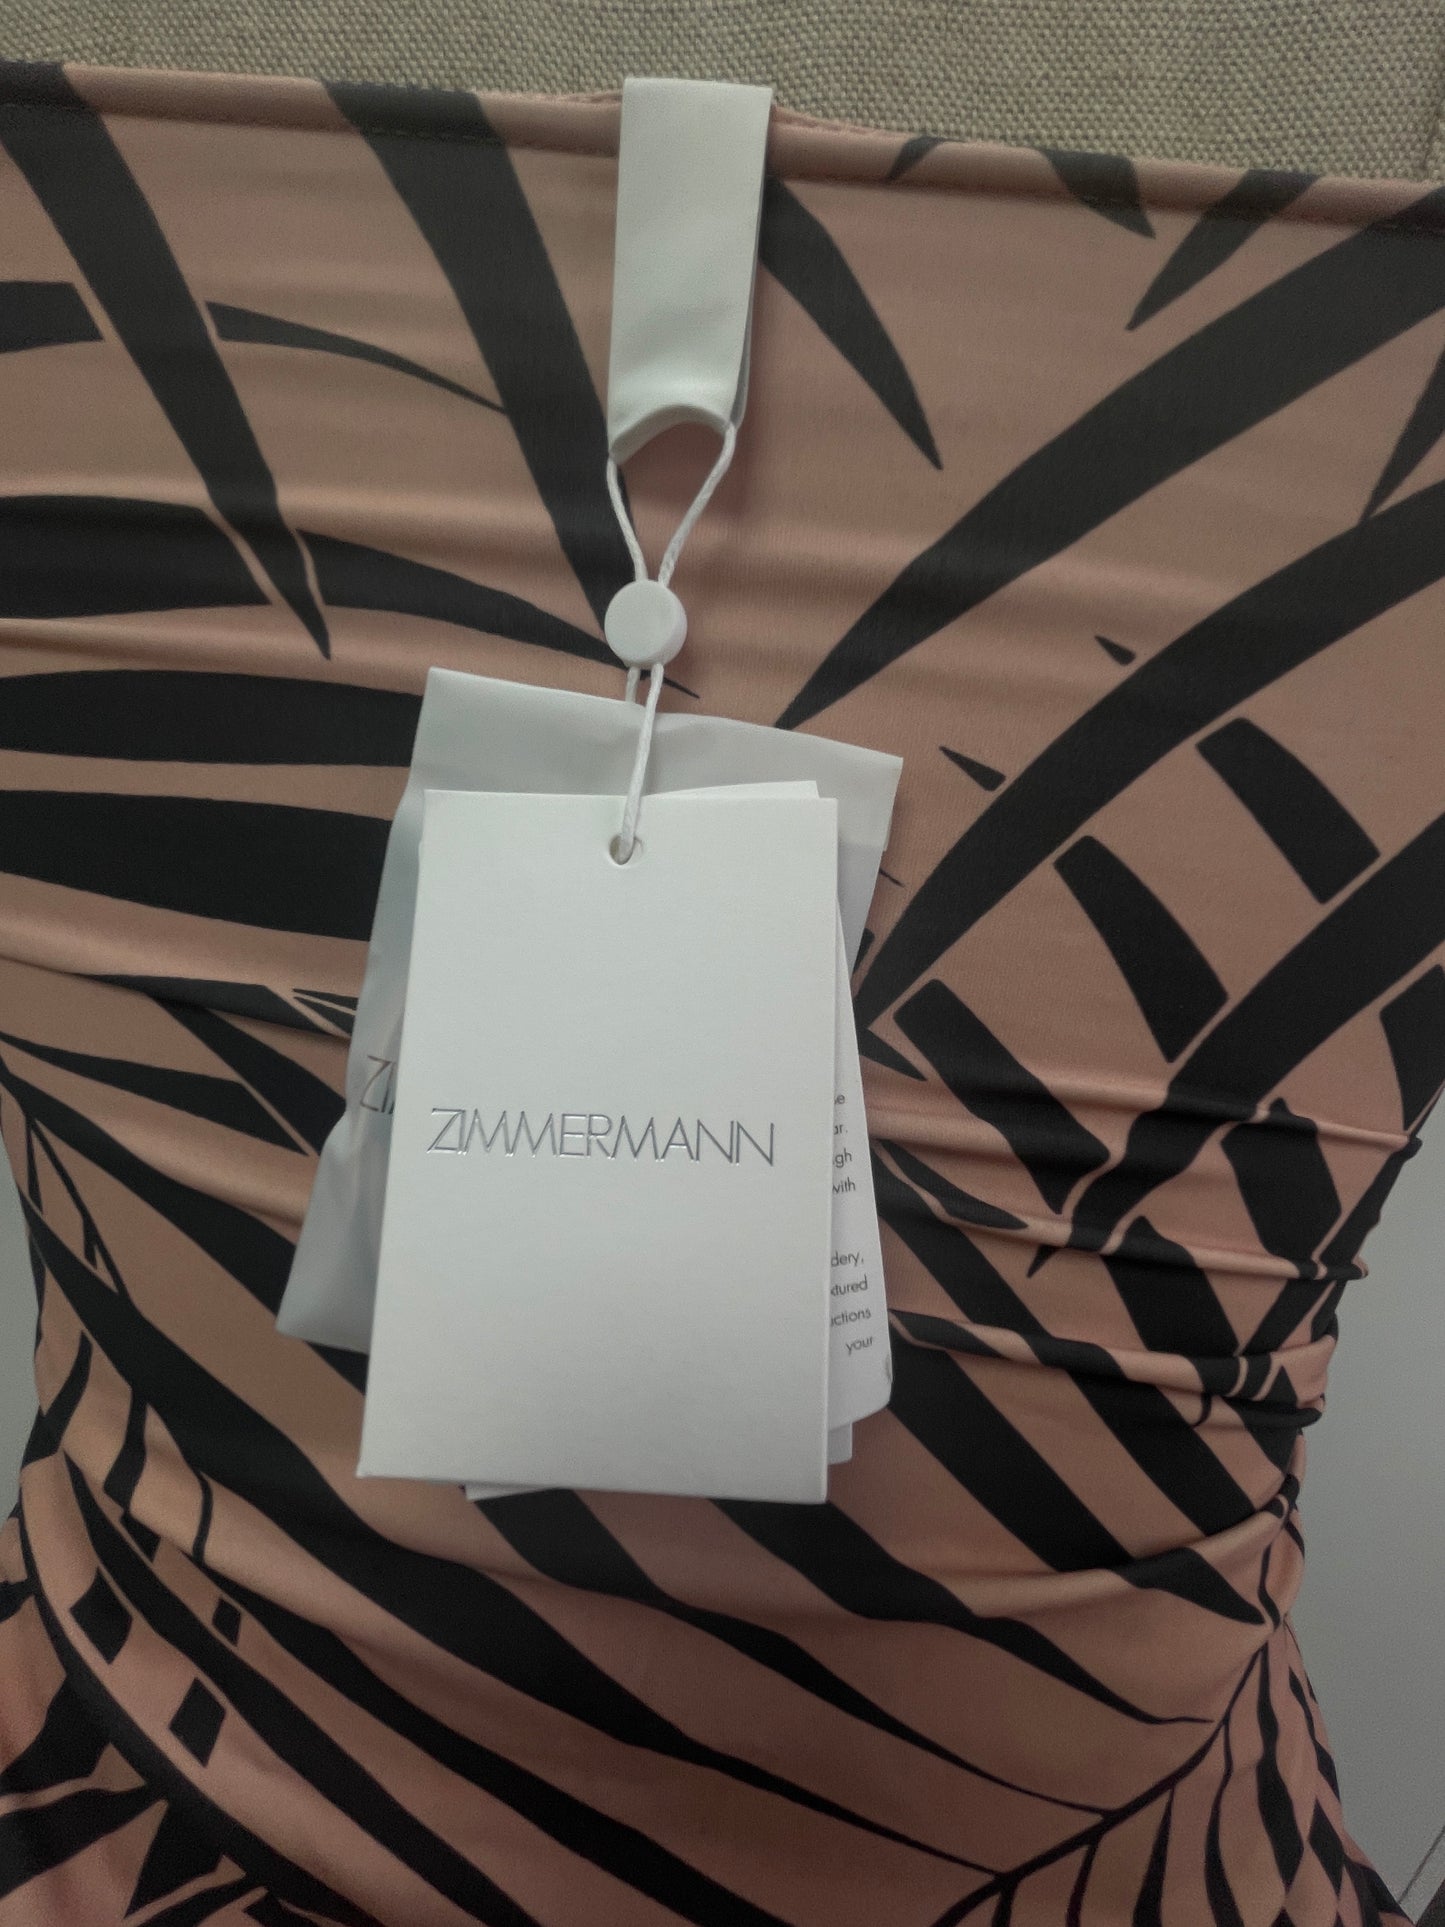 Zimmermann Nude Sculpt Link Ruched Zebra-print Bandeau Swimsuit With Detachable Straps Included BNWT UK 8